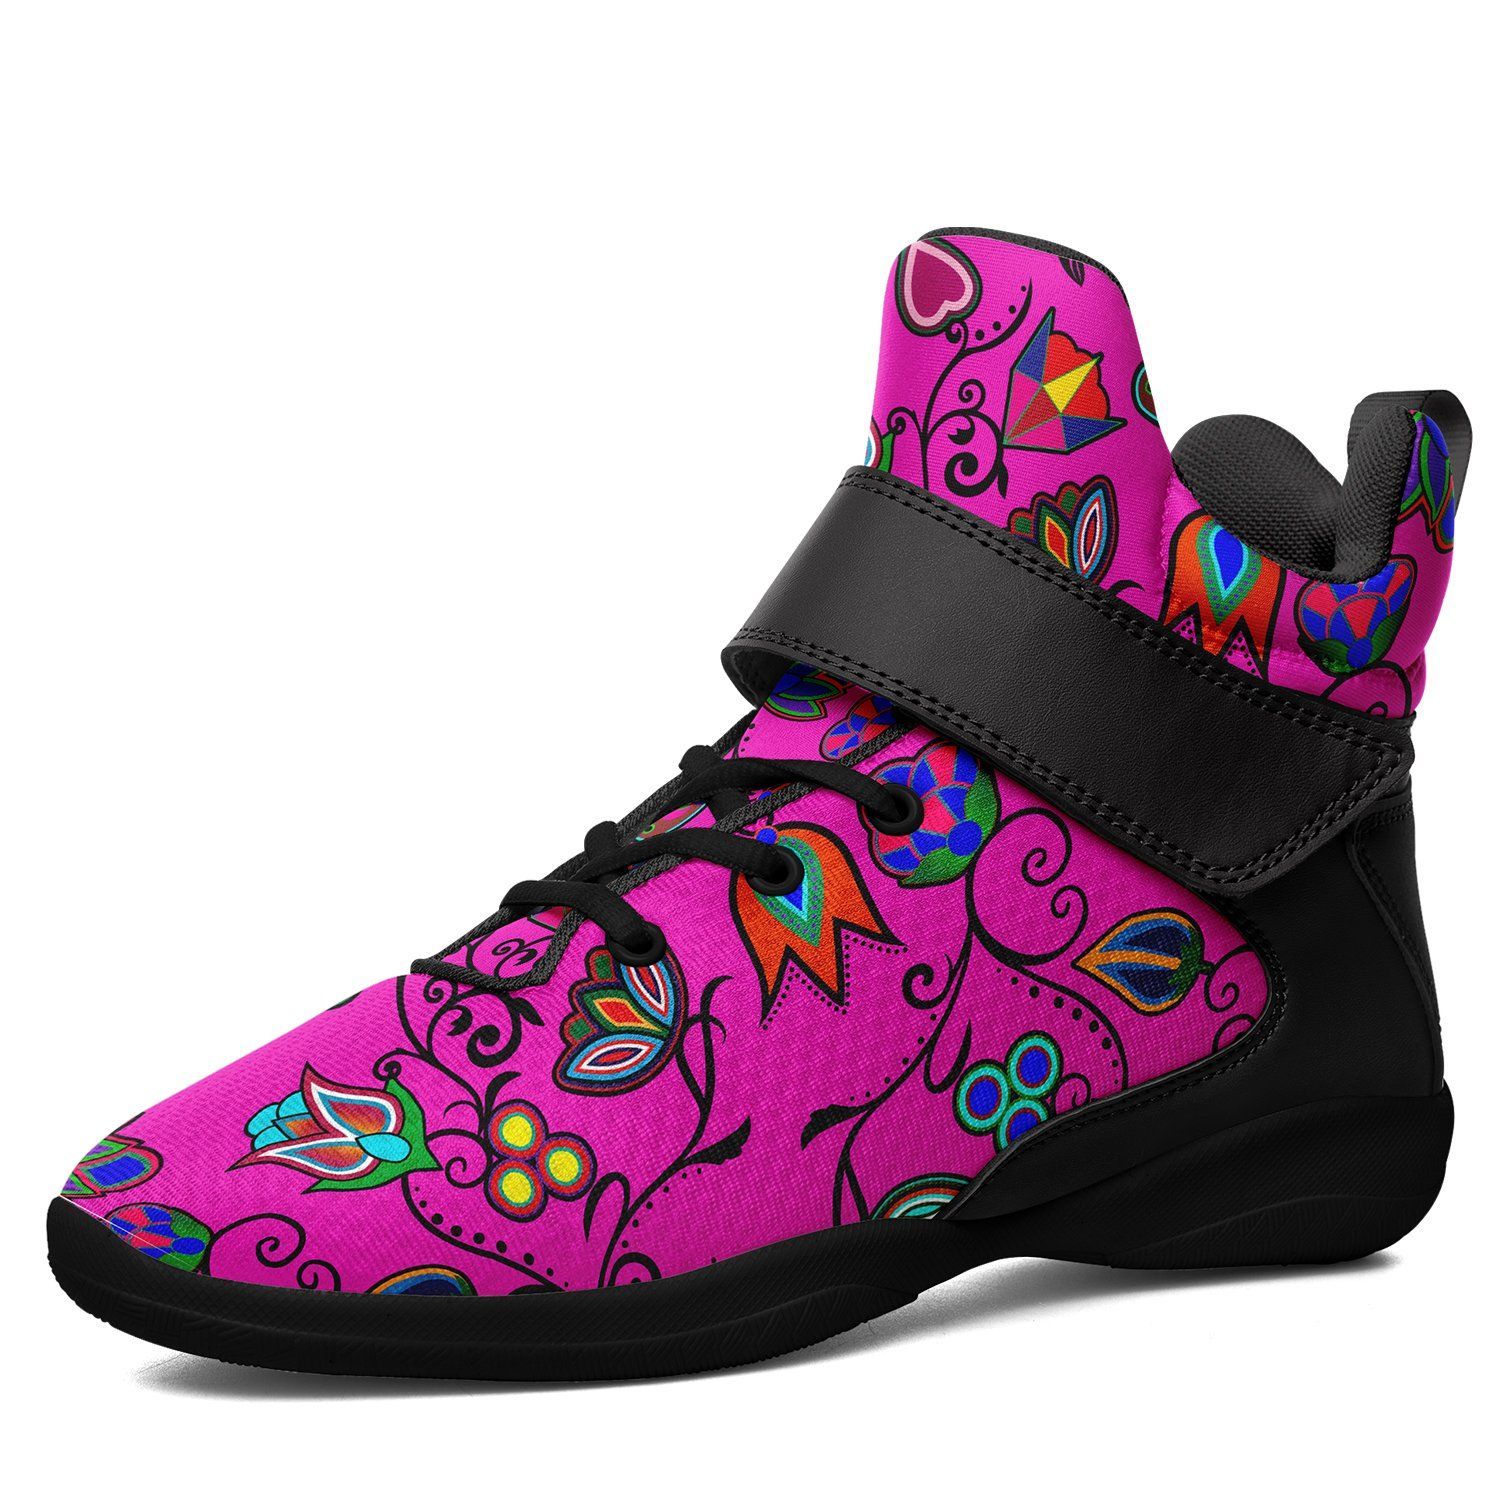 Indigenous Paisley Ipottaa Basketball / Sport High Top Shoes - Black Sole 49 Dzine US Men 7 / EUR 40 Black Sole with Black Strap 